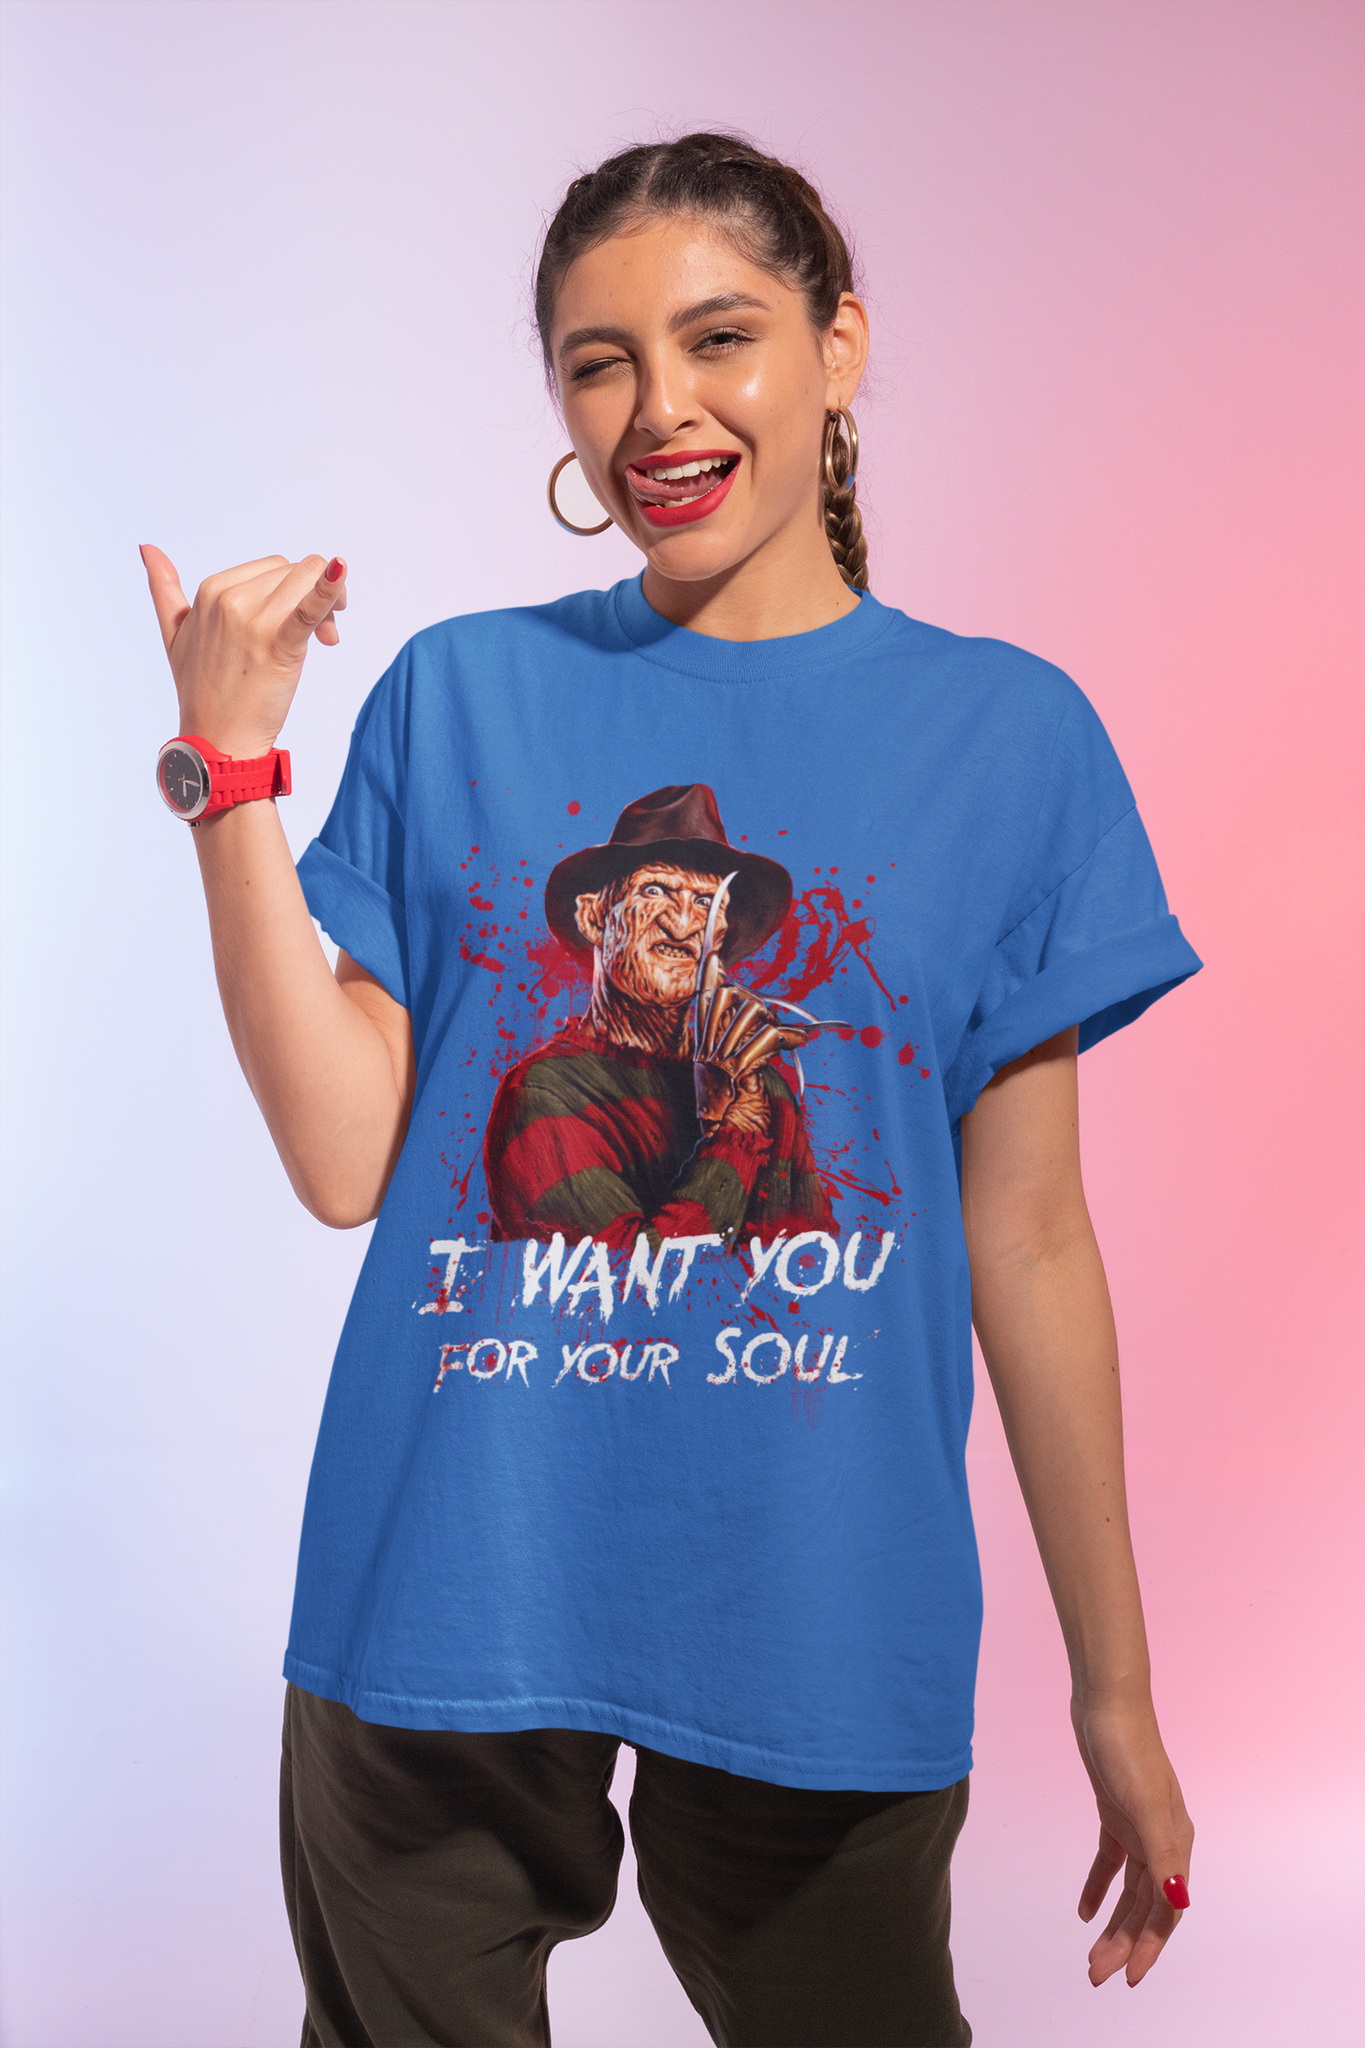 Nightmare On Elm Street T Shirt, Freddy Krueger T Shirt, I Want You For Your Soul Tshirt, Halloween Gifts